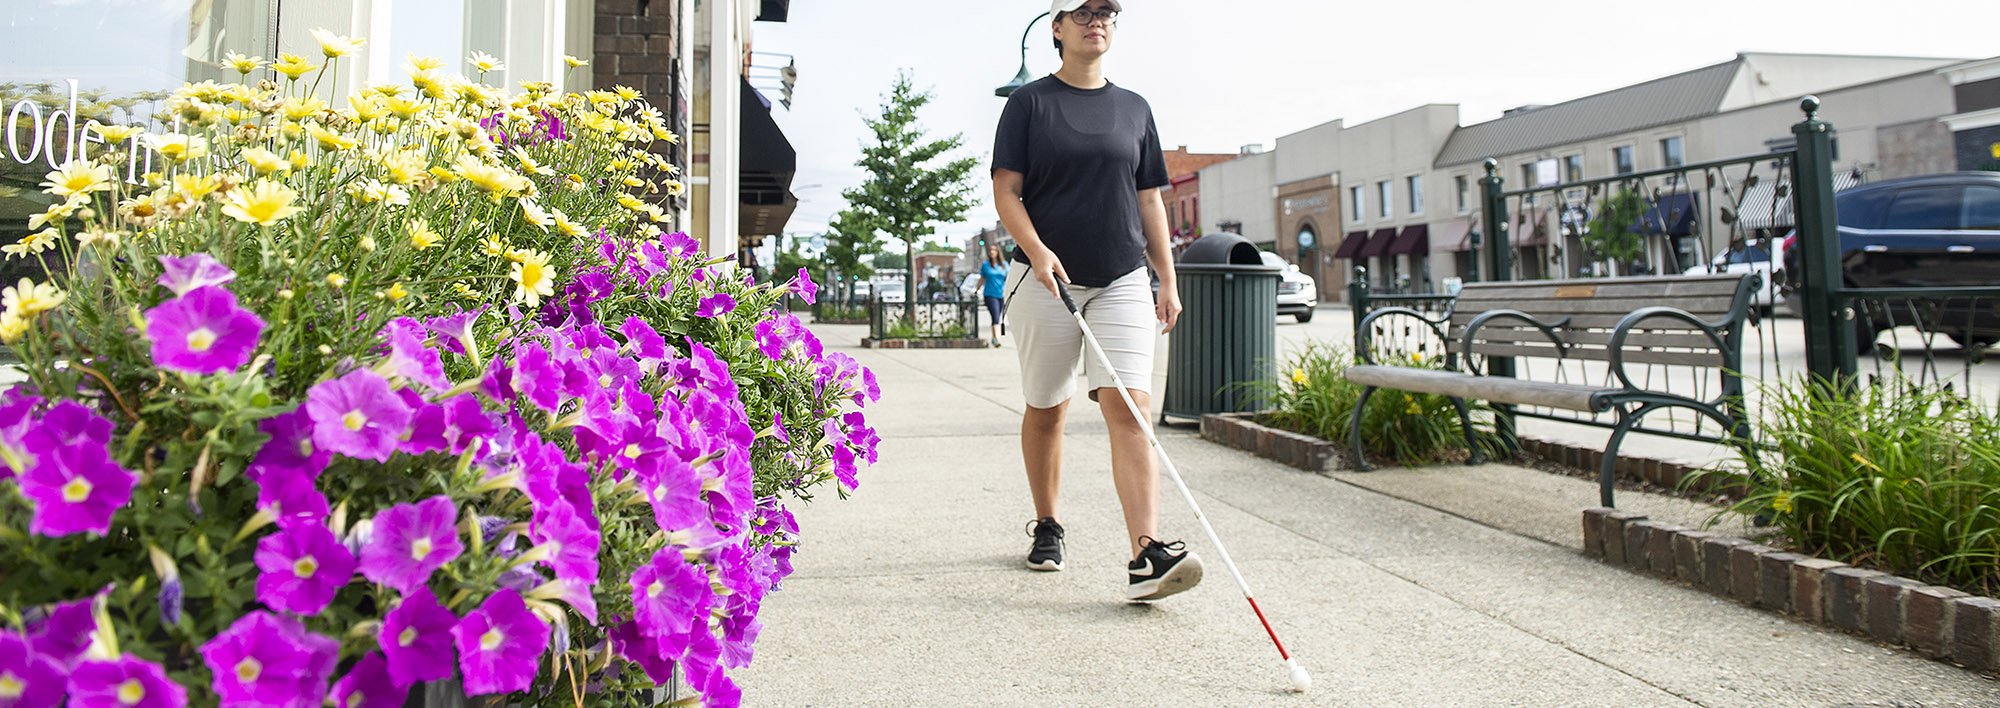 A young woman walks along a downtown sidewalk with traffic on her left side and flower boxes and a storefront on her right. She is using a white cane to navigate